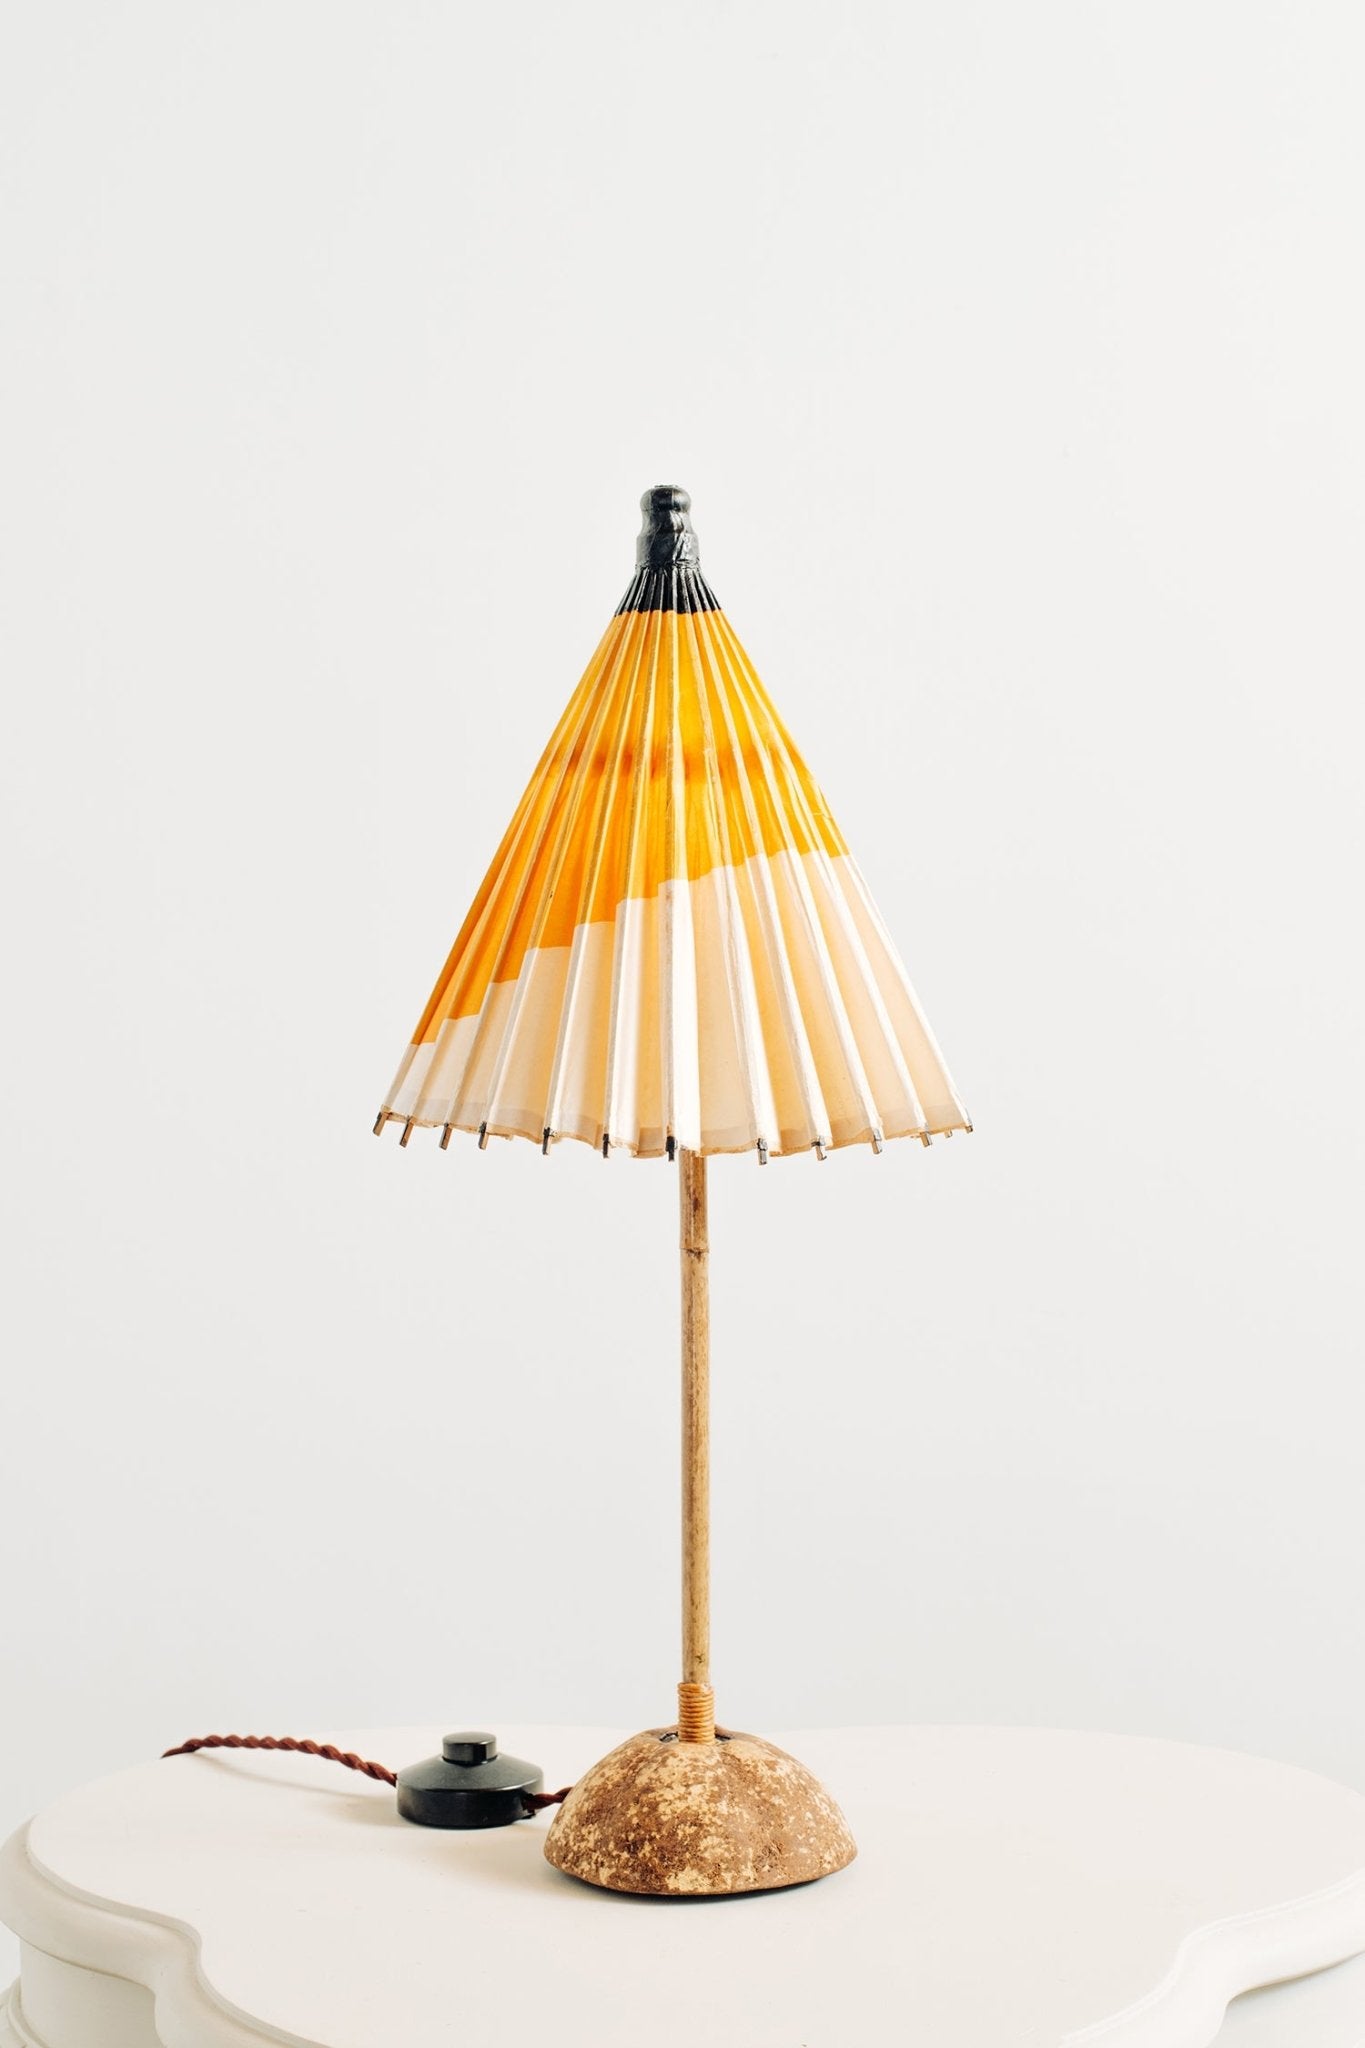 1933 Chicago 'World's Fair' Bamboo Cocktail Lamp with Parasol Shade and Coconut Base — Model No. 004 - Tennant New York